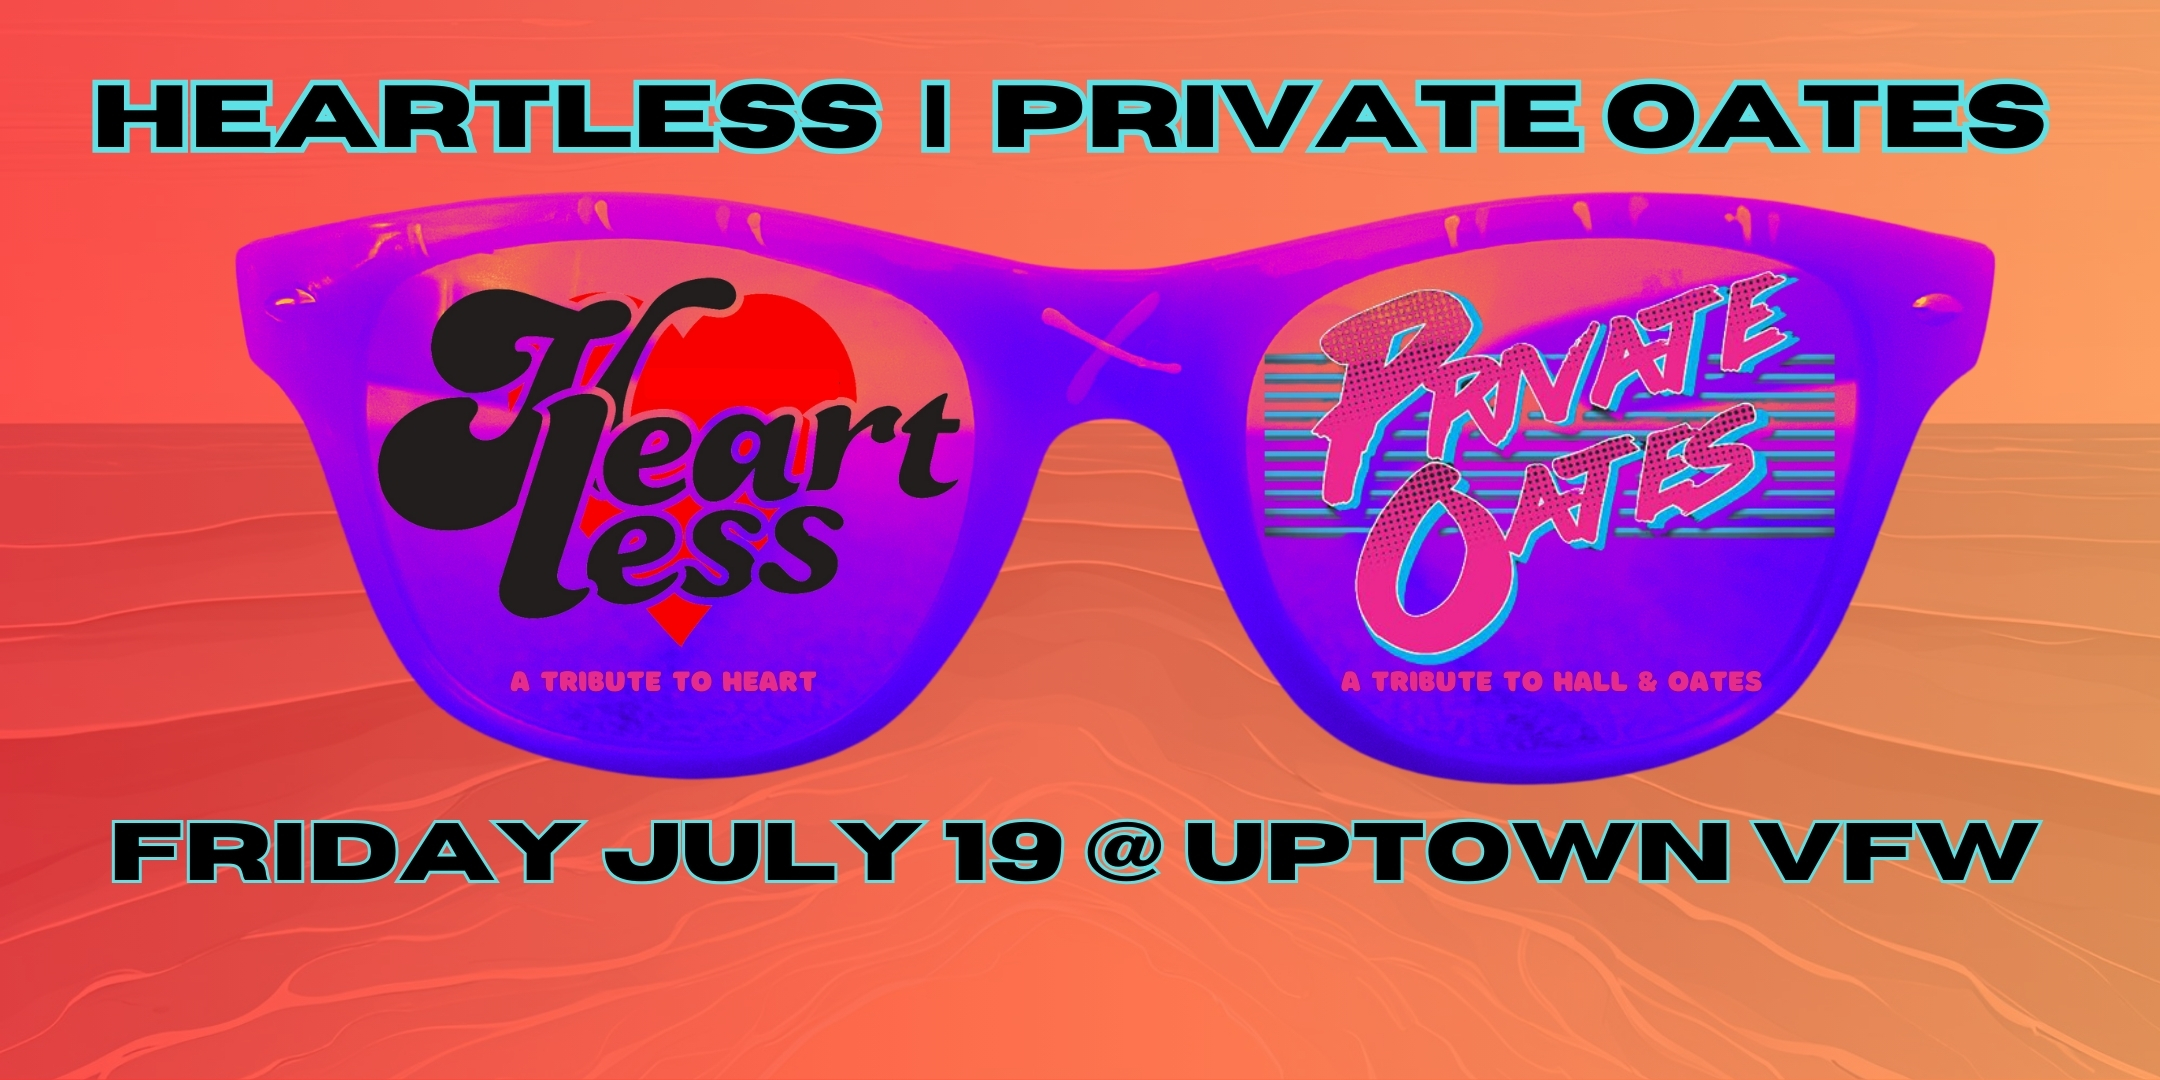 Heartless - A Tribute to Heart Private Oates - A Tribute to Hall & Oates Friday, July 19 James Ballentine "Uptown" VFW Post 246 Doors 9:30pm :: Music 10:00pm :: 21+ GA $15 ADV / $20 DOS NO REFUNDS Tickets On-Sale Now